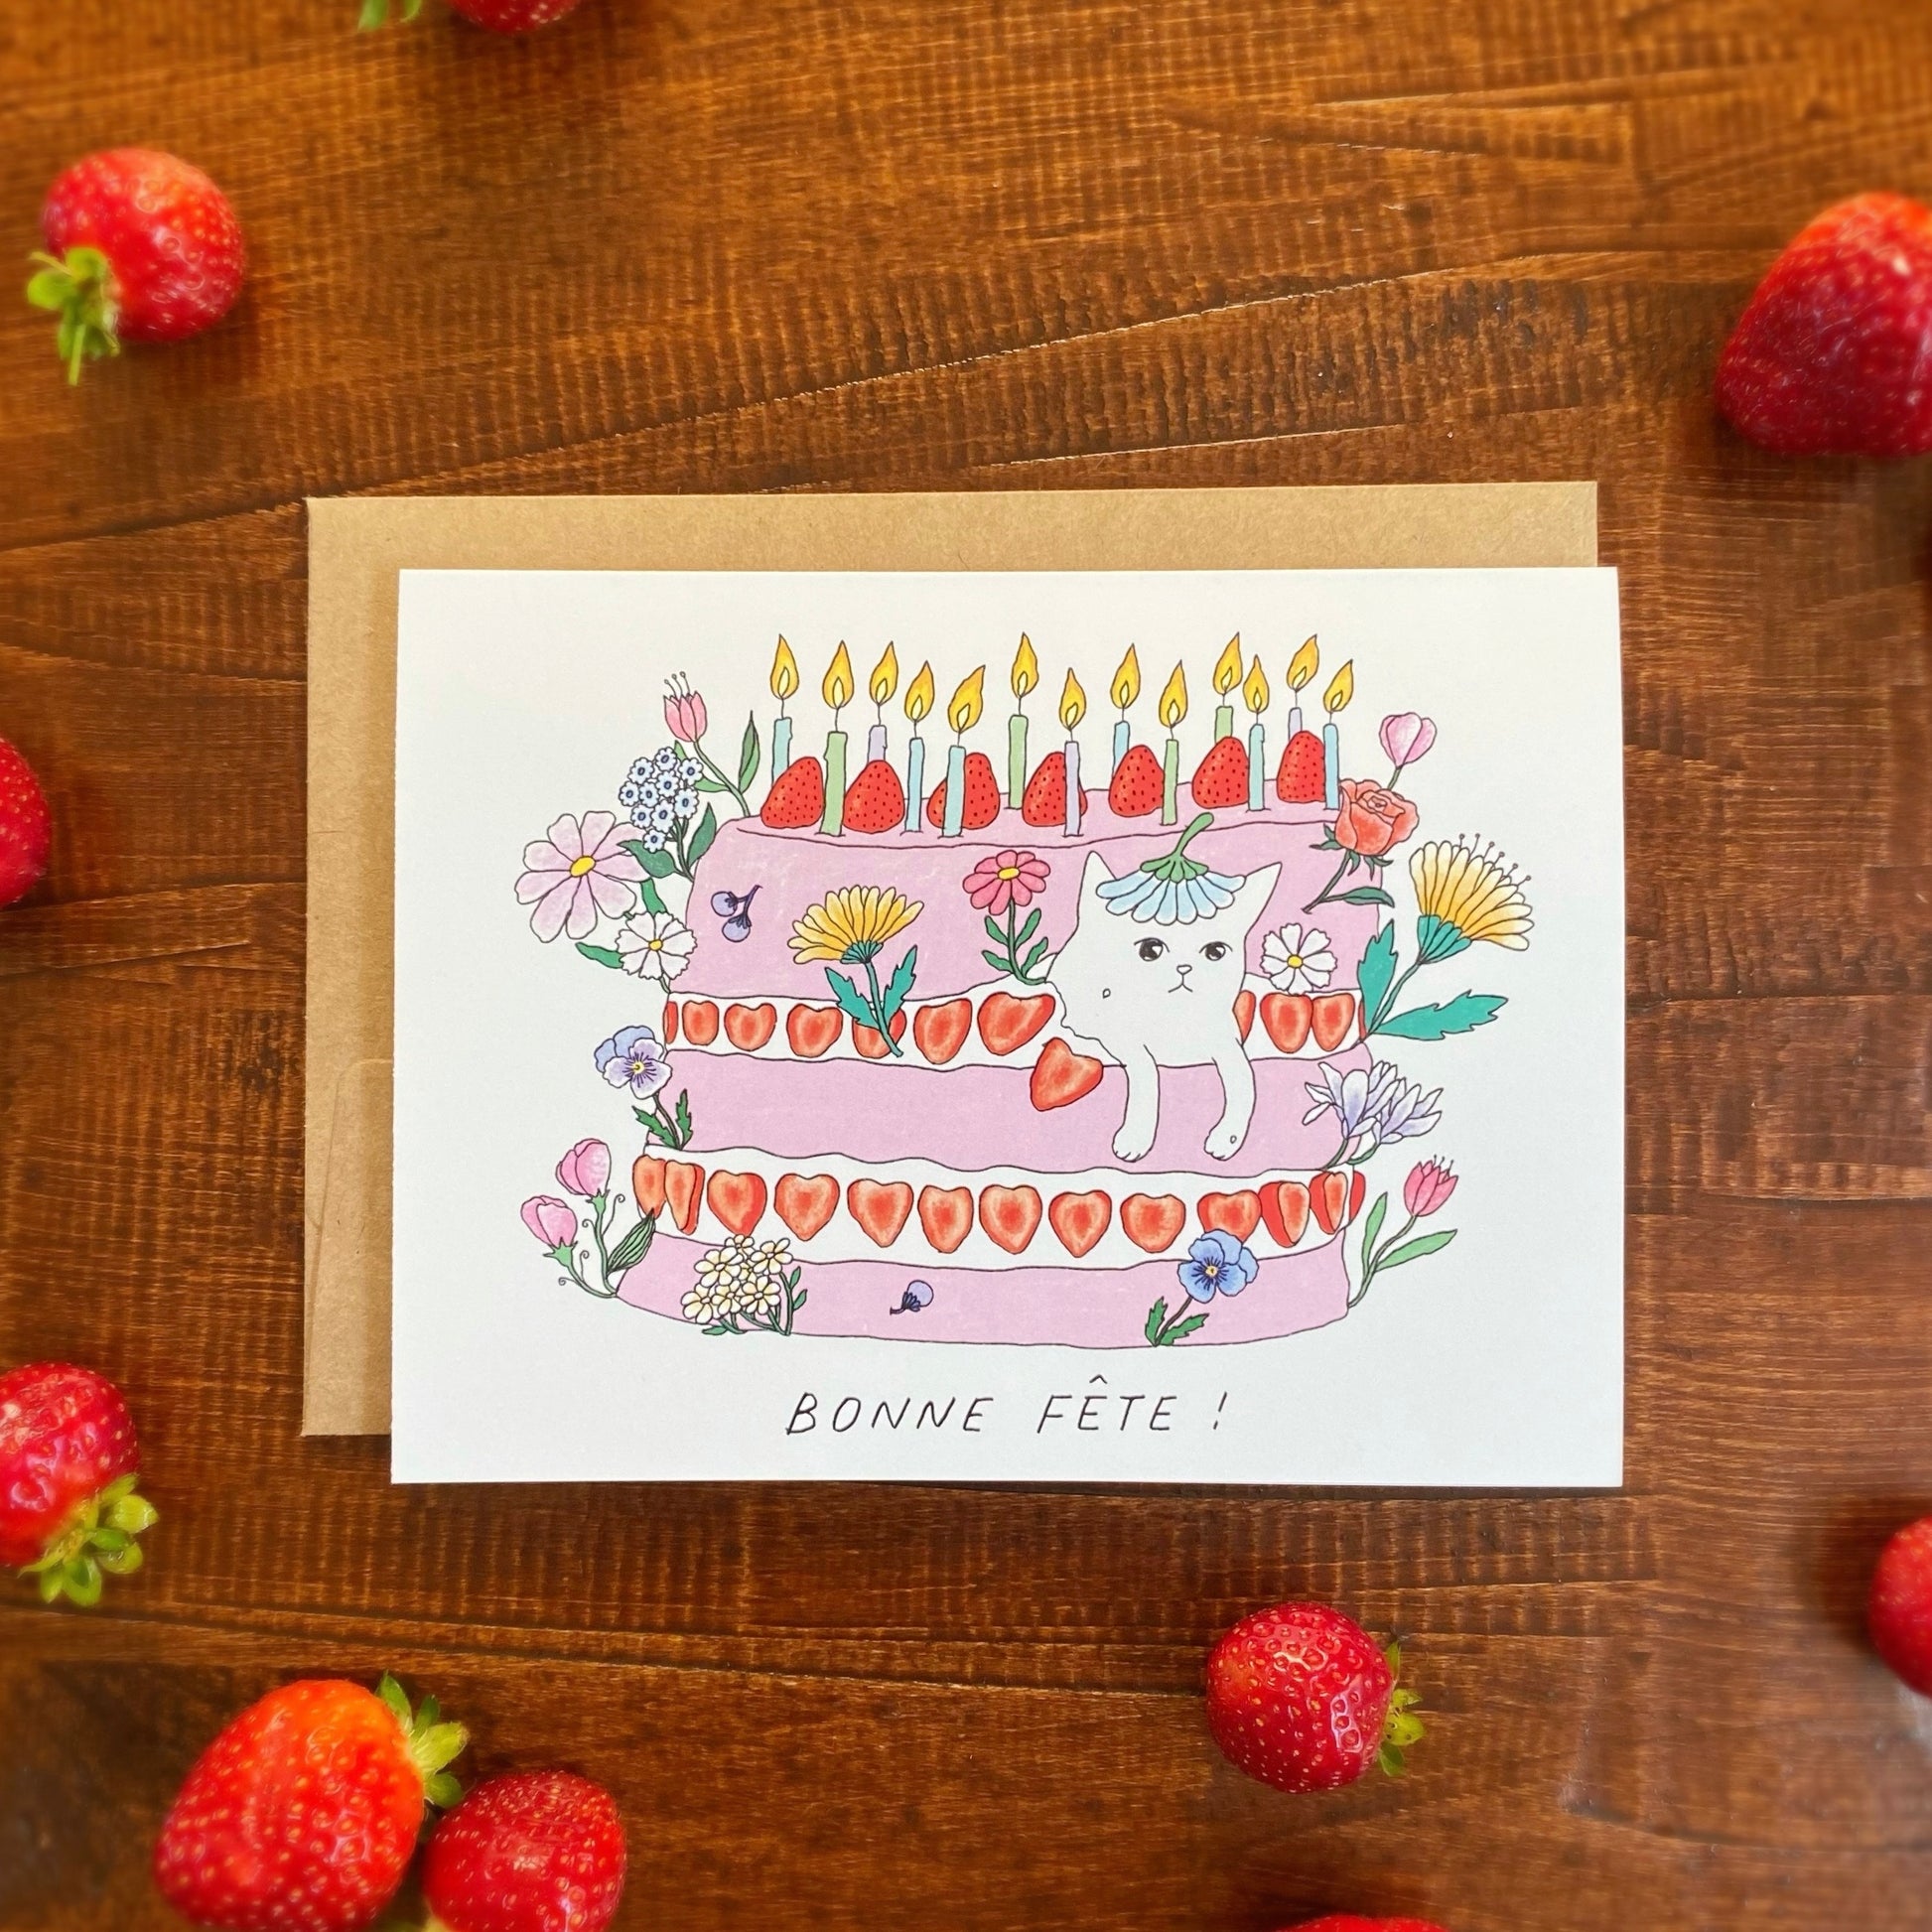 Cute birthday card of a white cat coming out of a pink birthday cake with lots of strawberries and flowers